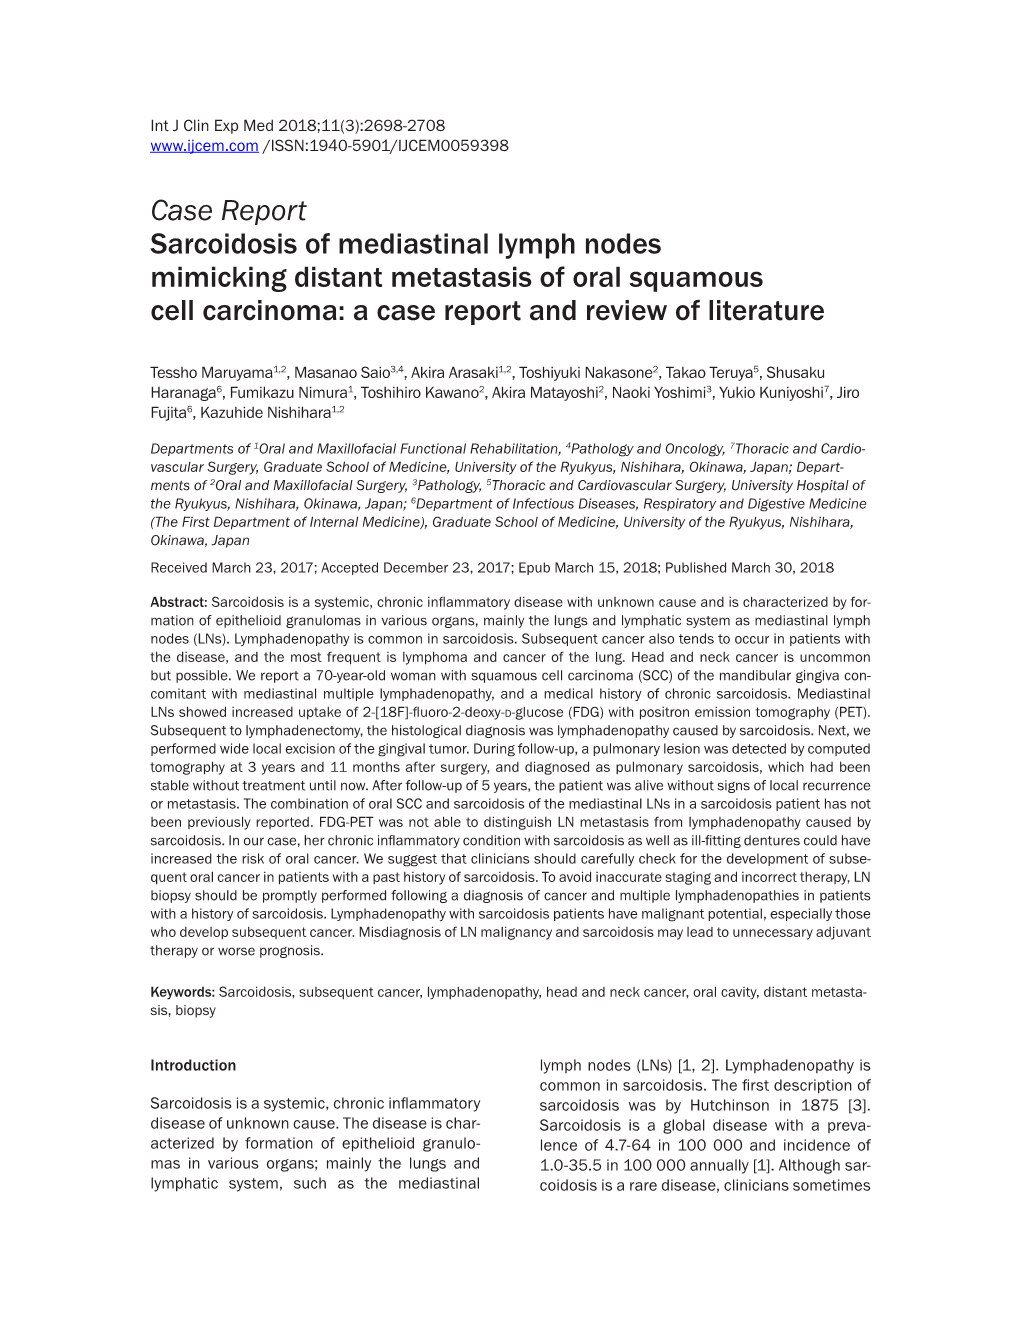 Case Report Sarcoidosis of Mediastinal Lymph Nodes Mimicking Distant Metastasis of Oral Squamous Cell Carcinoma: a Case Report and Review of Literature